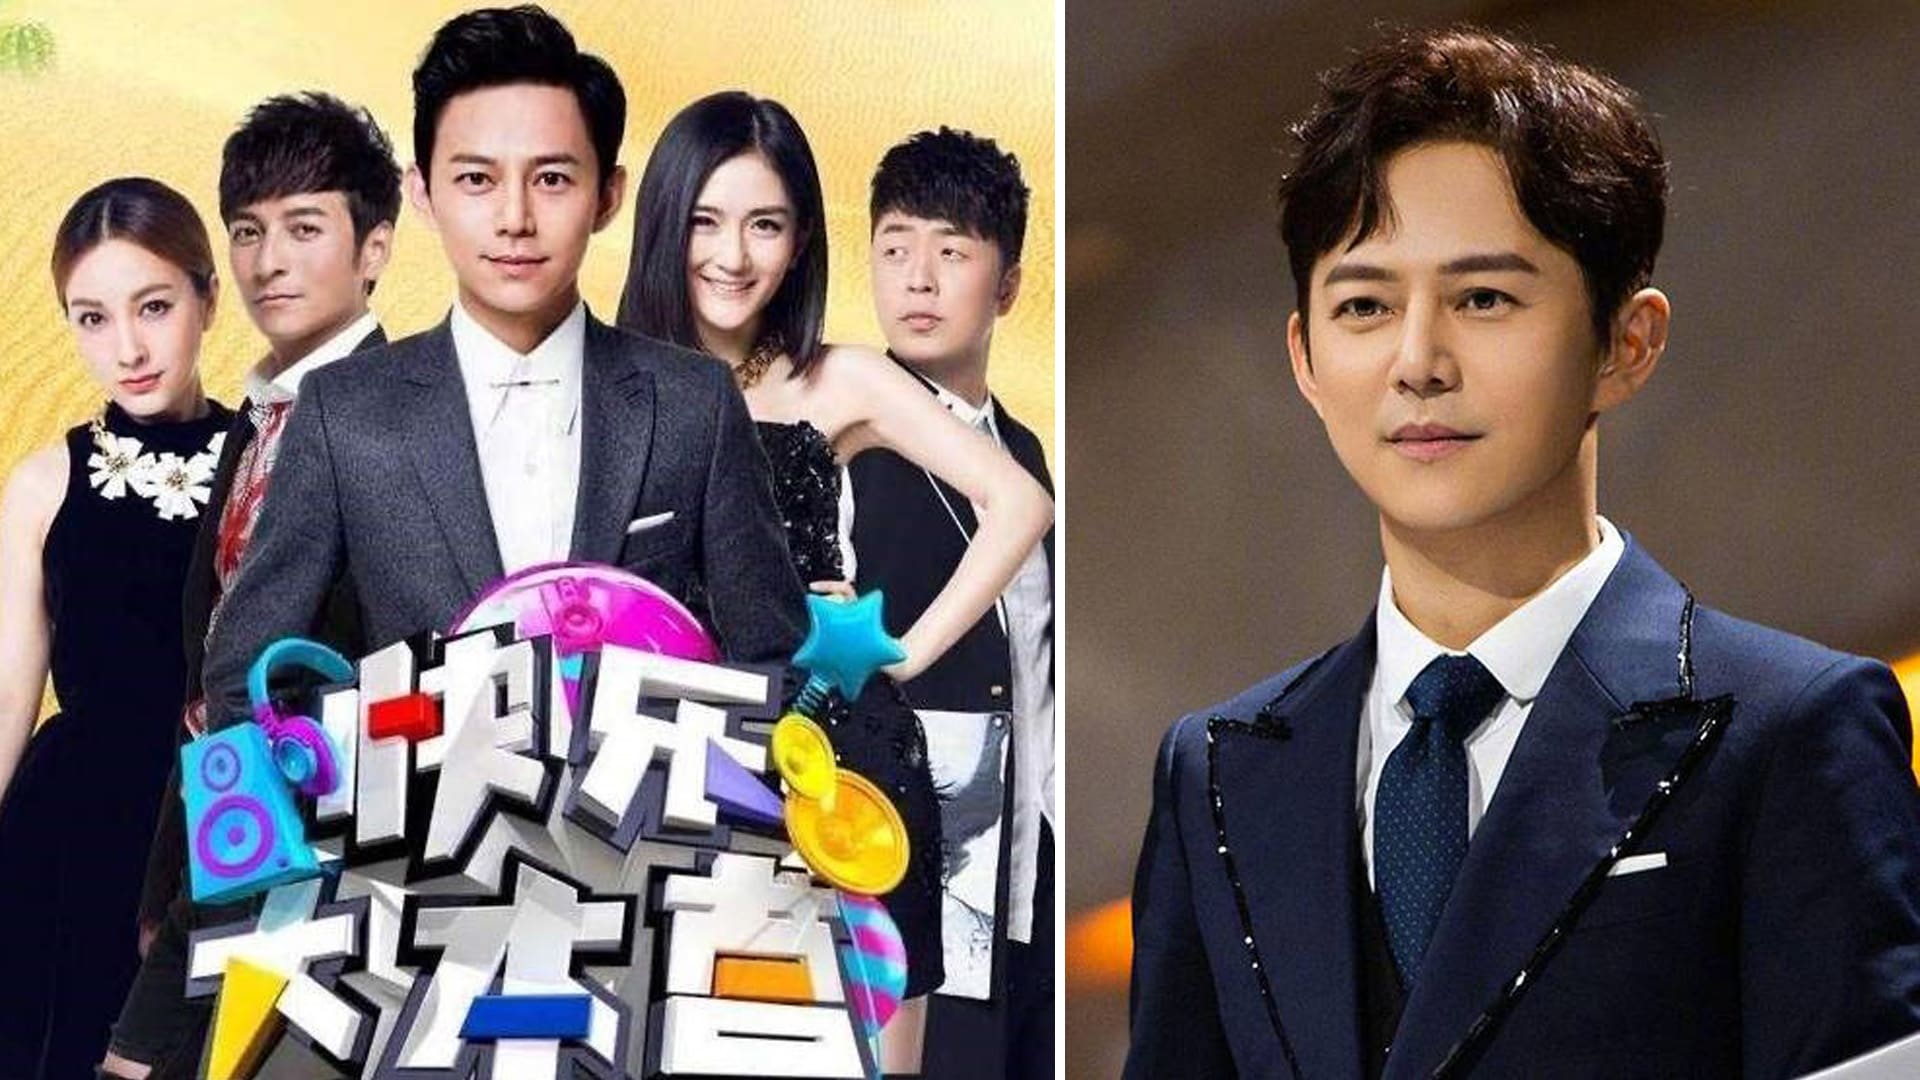 Happy Camp Cancelled After 24 Years, He Jiong To Host New Variety Show With Stars Like Ada Choi